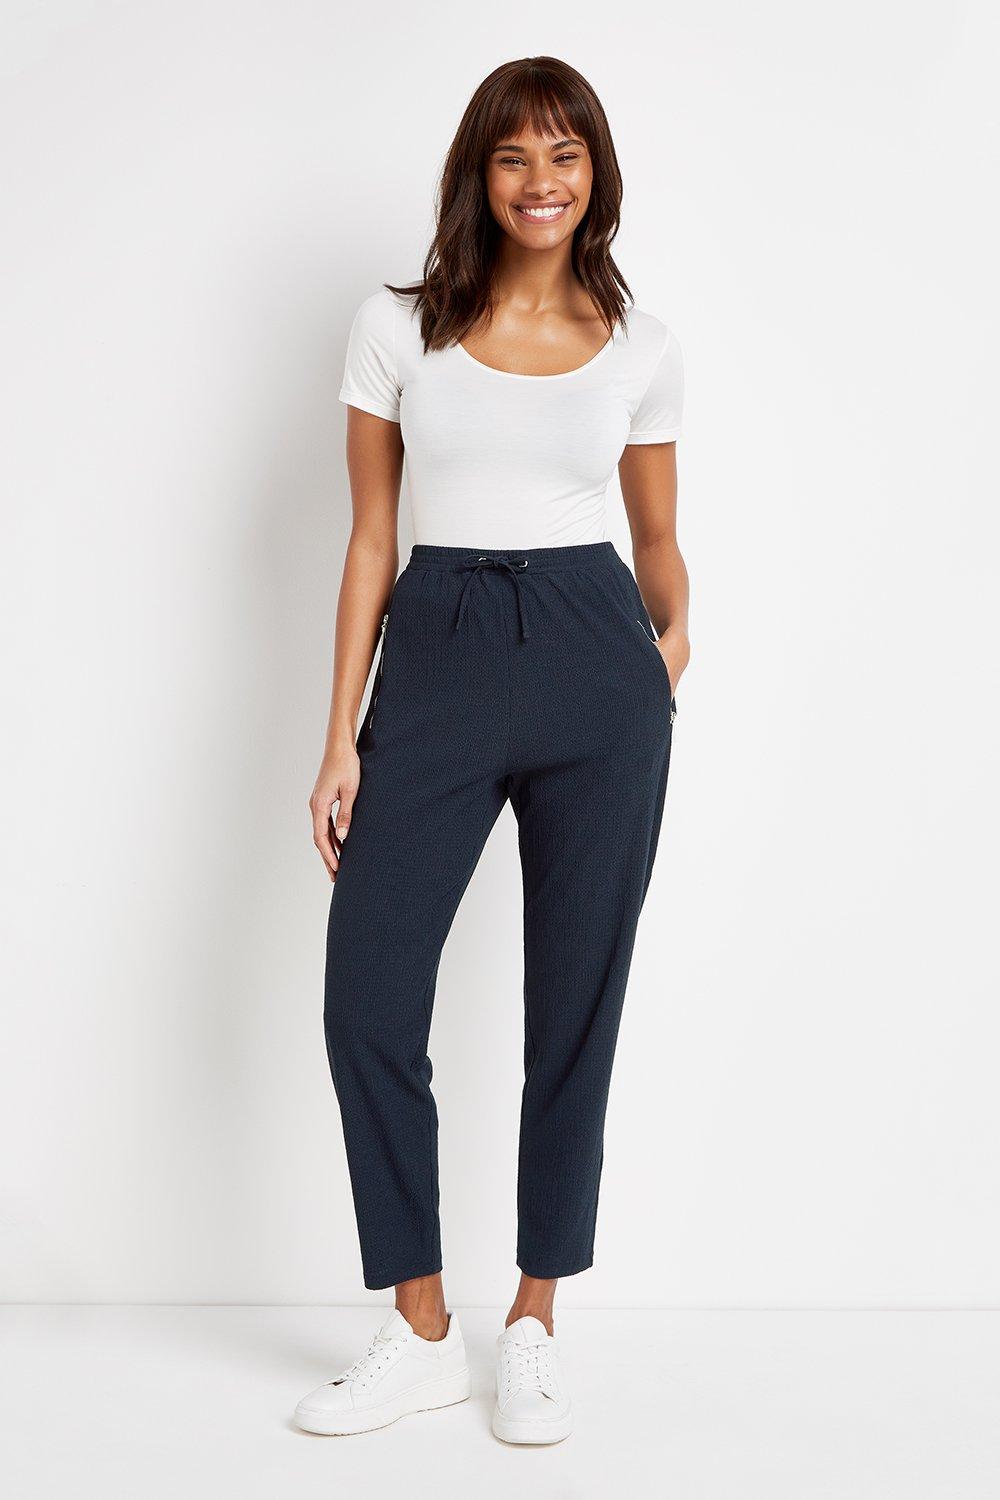 Level Up Your Loungewear With These Must-Have Joggers. A Cosy Relaxed Fit And Versatile Navy Hue Will Have You Wearing These On-Repeat, Whilst Zip Pocket Detailing Brings An Extra Touch Of Style. Wear With A Relaxed Tee And White Trainers For A Laid-Back